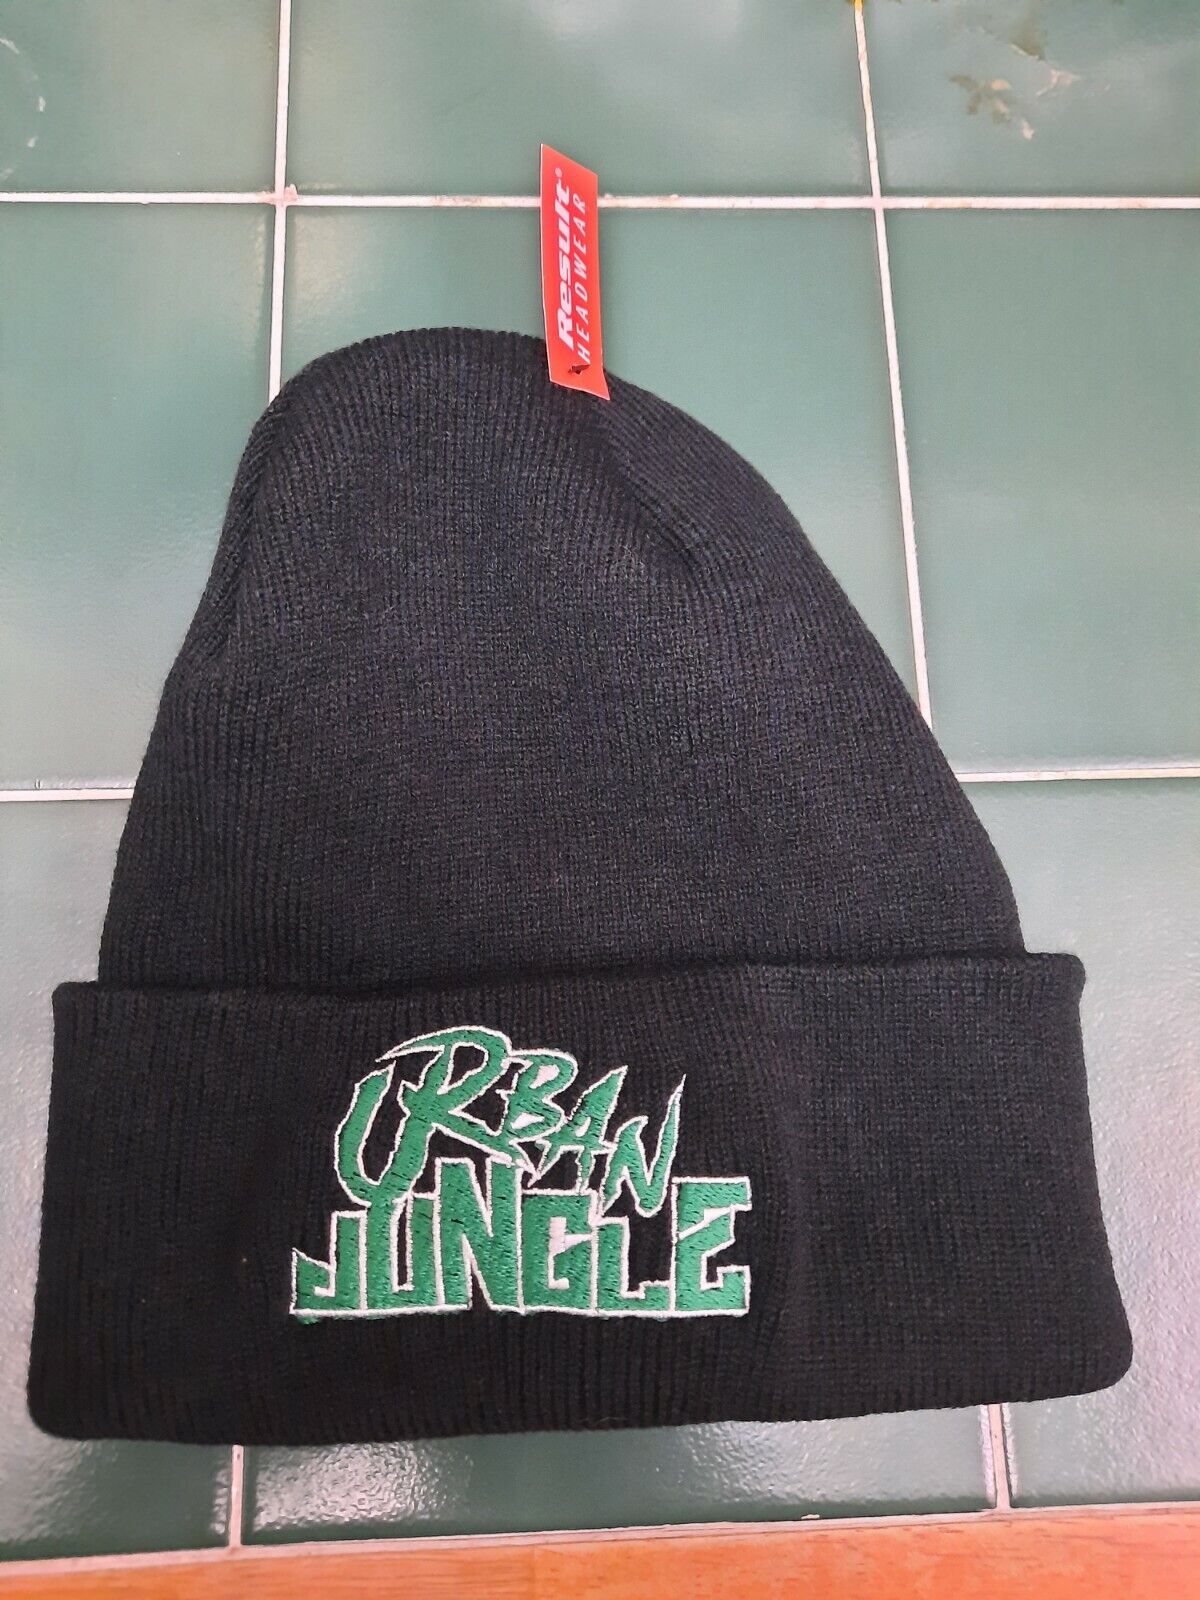 Personalised Beanies UK - Embroidered and Printed Beanie Hats